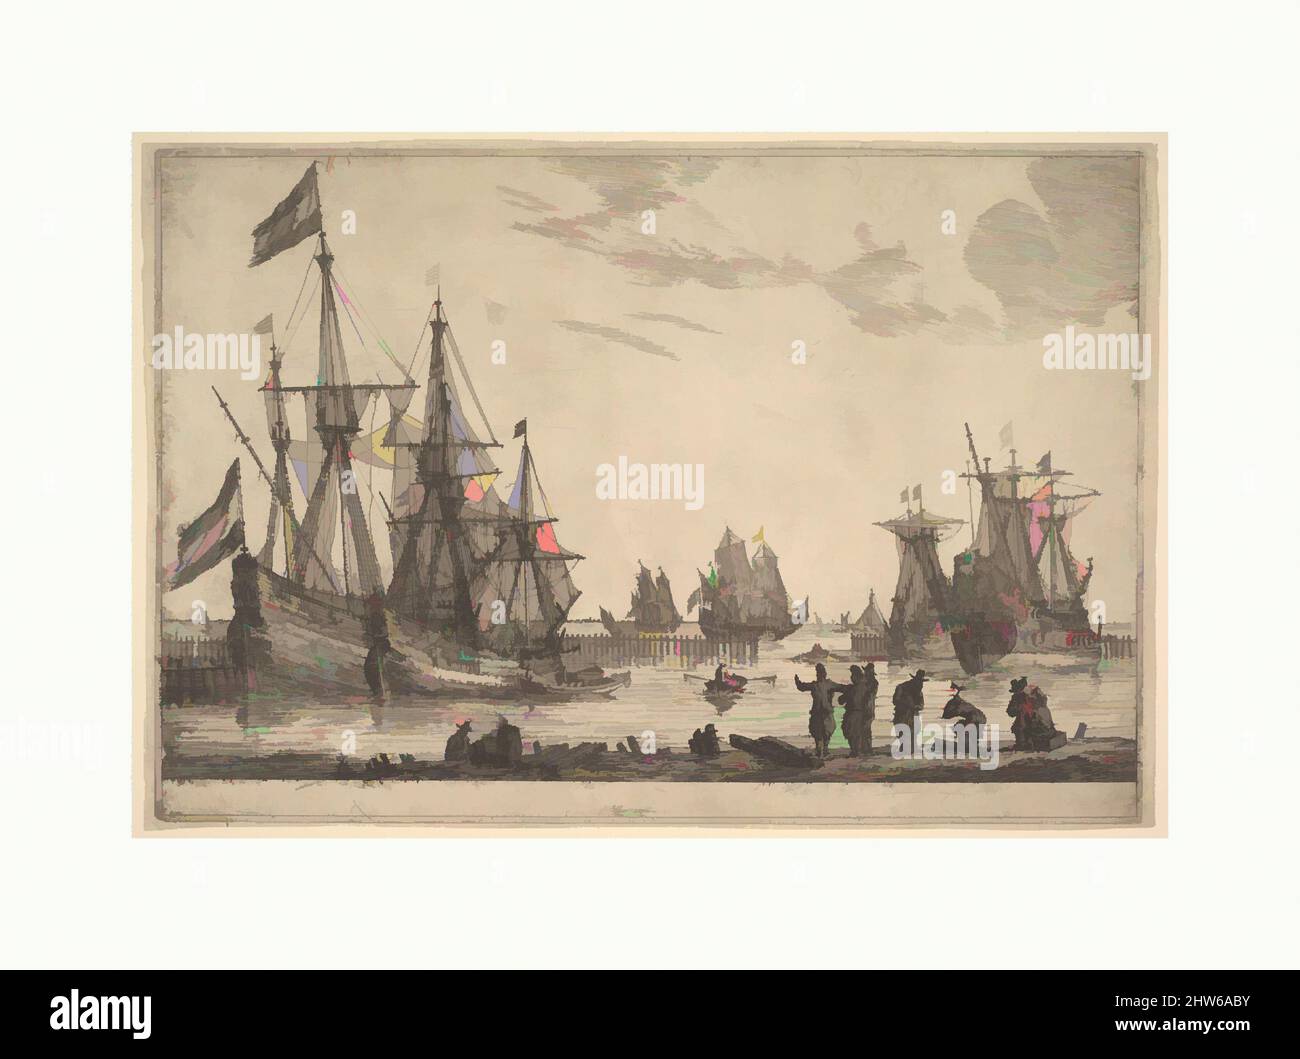 Art inspired by Four Sailing Vessels near a Breakwater, 17th century, Etching; state I, sheet: 8 1/4 x 12 1/16 in. (20.9 x 30.7 cm), Prints, Reinier Nooms, called Zeeman (Dutch, Amsterdam ca. 1623–1664 Amsterdam, Classic works modernized by Artotop with a splash of modernity. Shapes, color and value, eye-catching visual impact on art. Emotions through freedom of artworks in a contemporary way. A timeless message pursuing a wildly creative new direction. Artists turning to the digital medium and creating the Artotop NFT Stock Photo